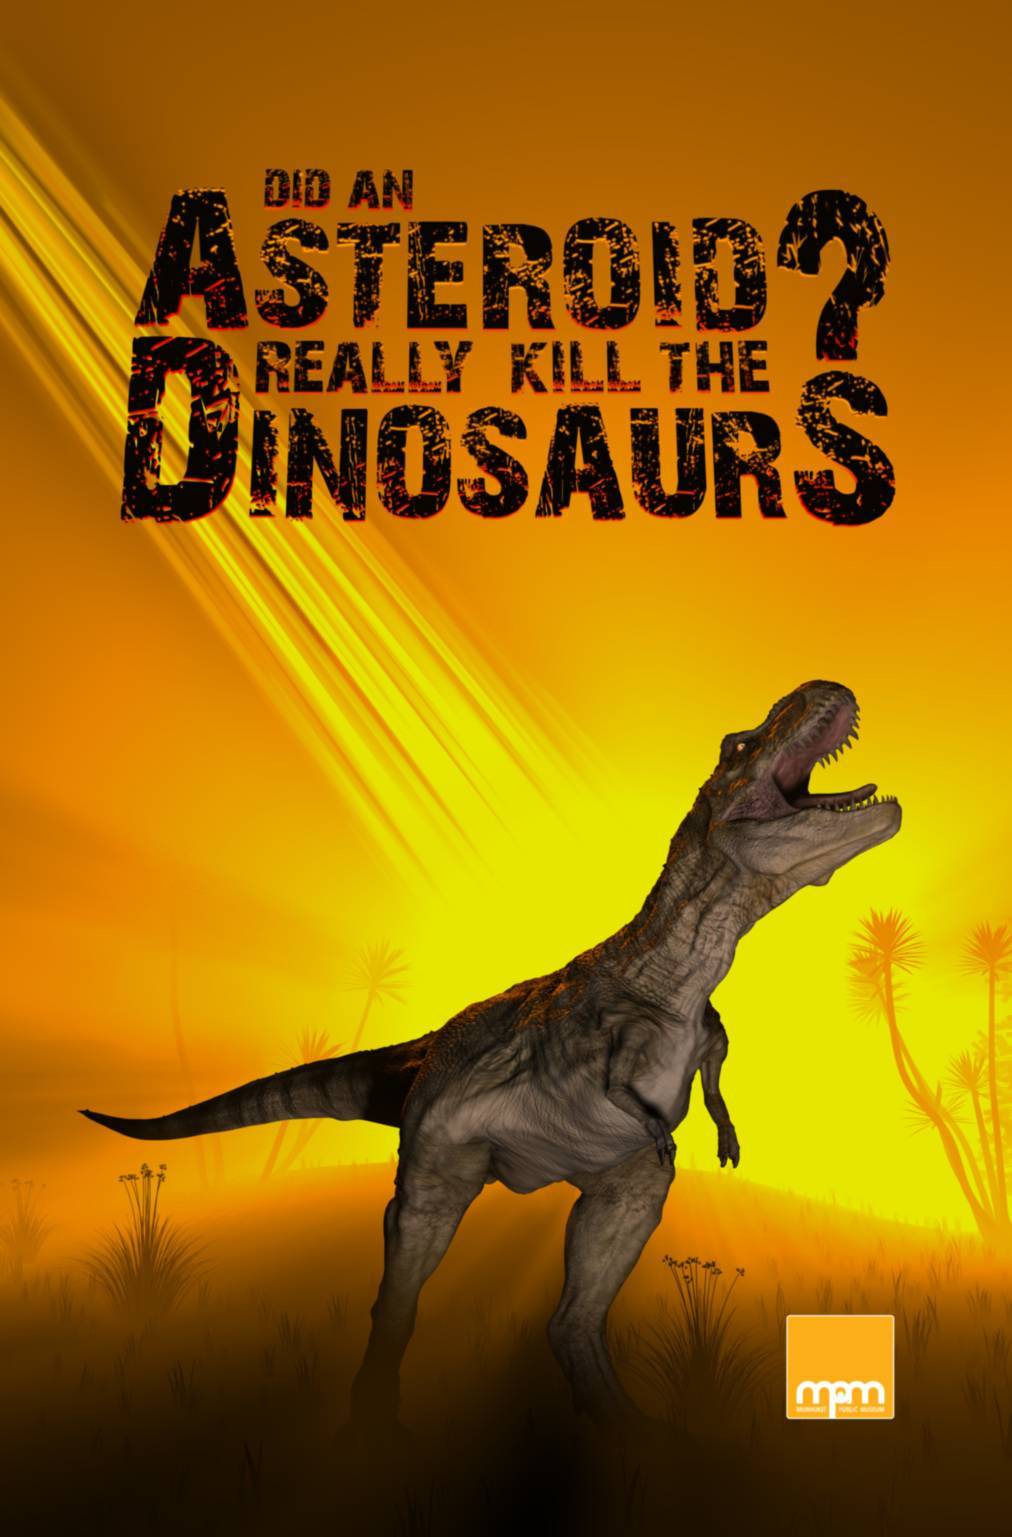 Dinosaur show poster with T-rex and asteroid